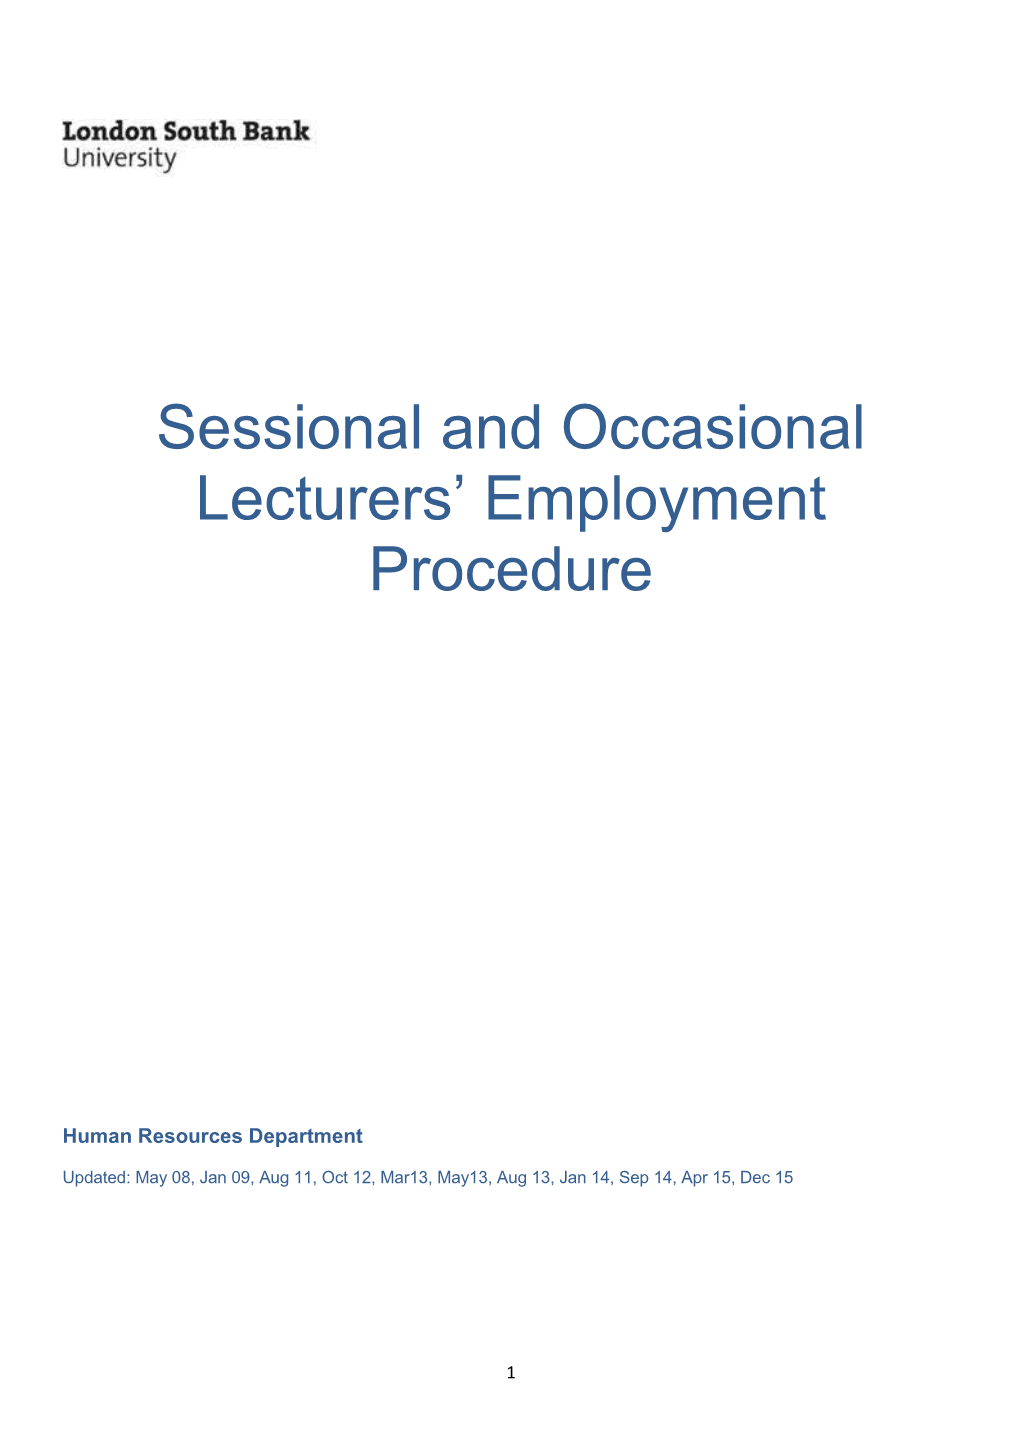 Sessional and Occasional Lecturers Employment Procedure